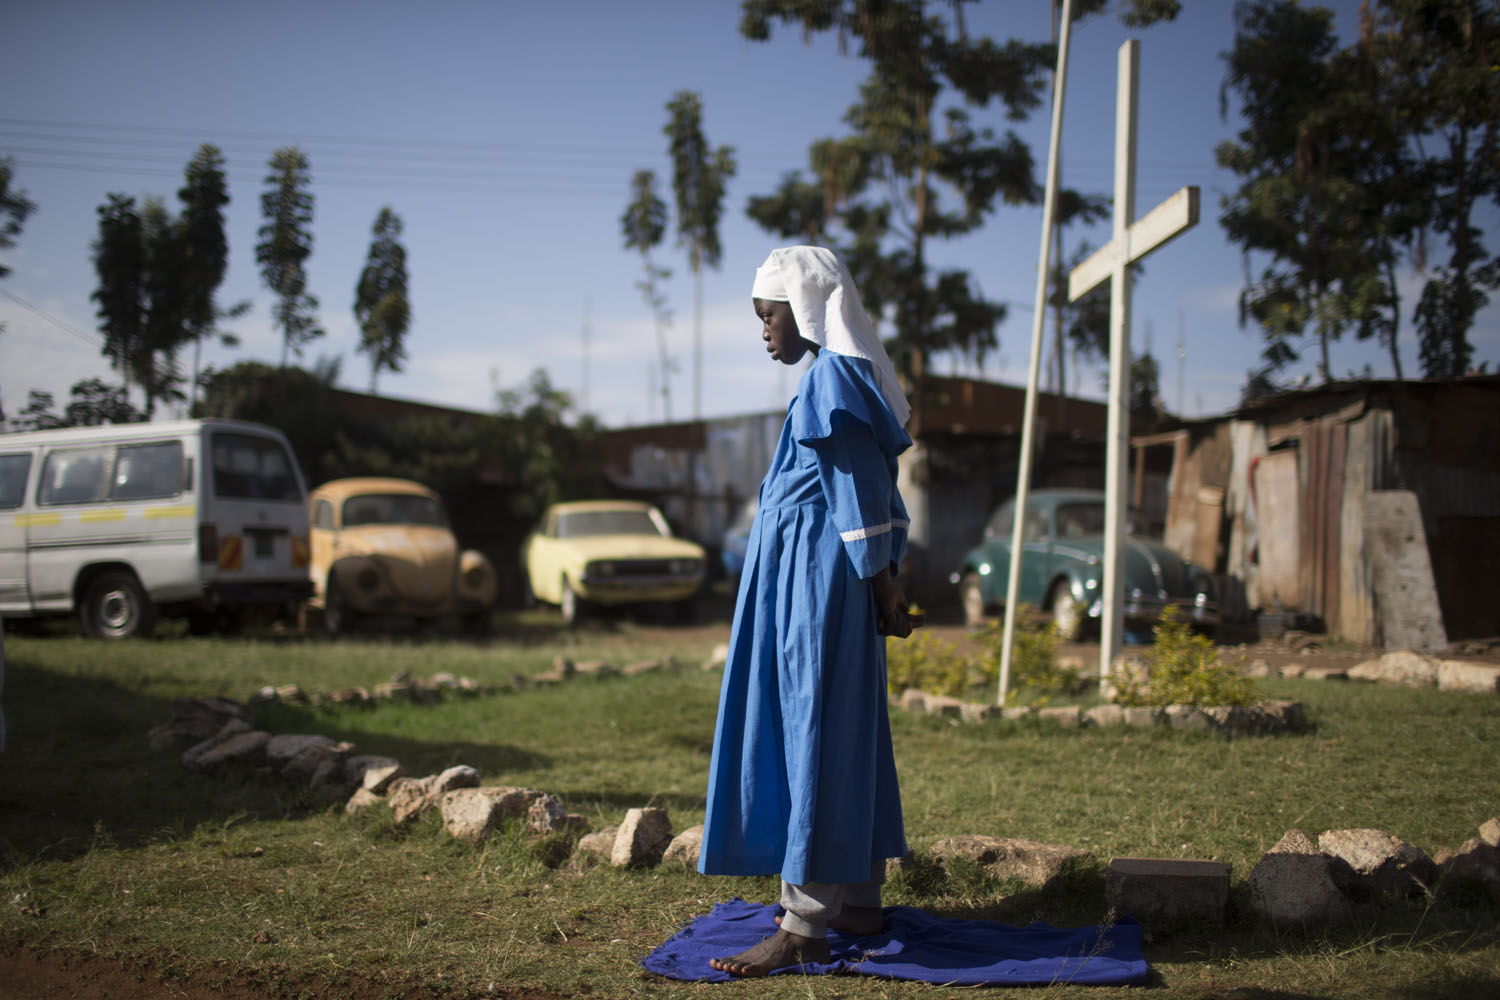 Sept. 29, 2013. A girl prays as Kenyans hold a church service for the victims of the Westgate Shopping Center attack in Nairobi, Kenya.